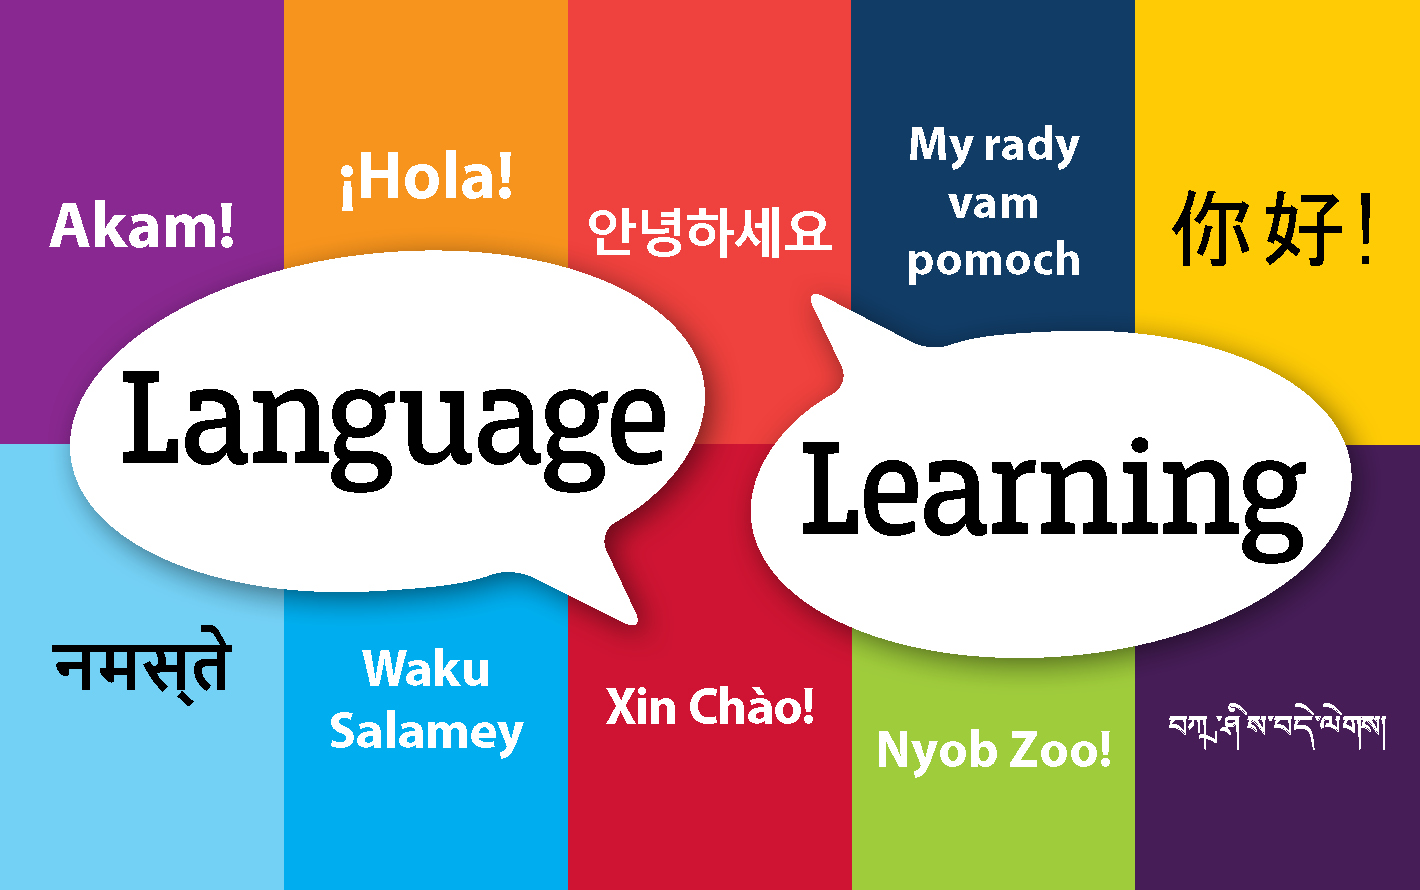 "Language learning" is superimposed on tiles with the word "hello" in multiple languages.